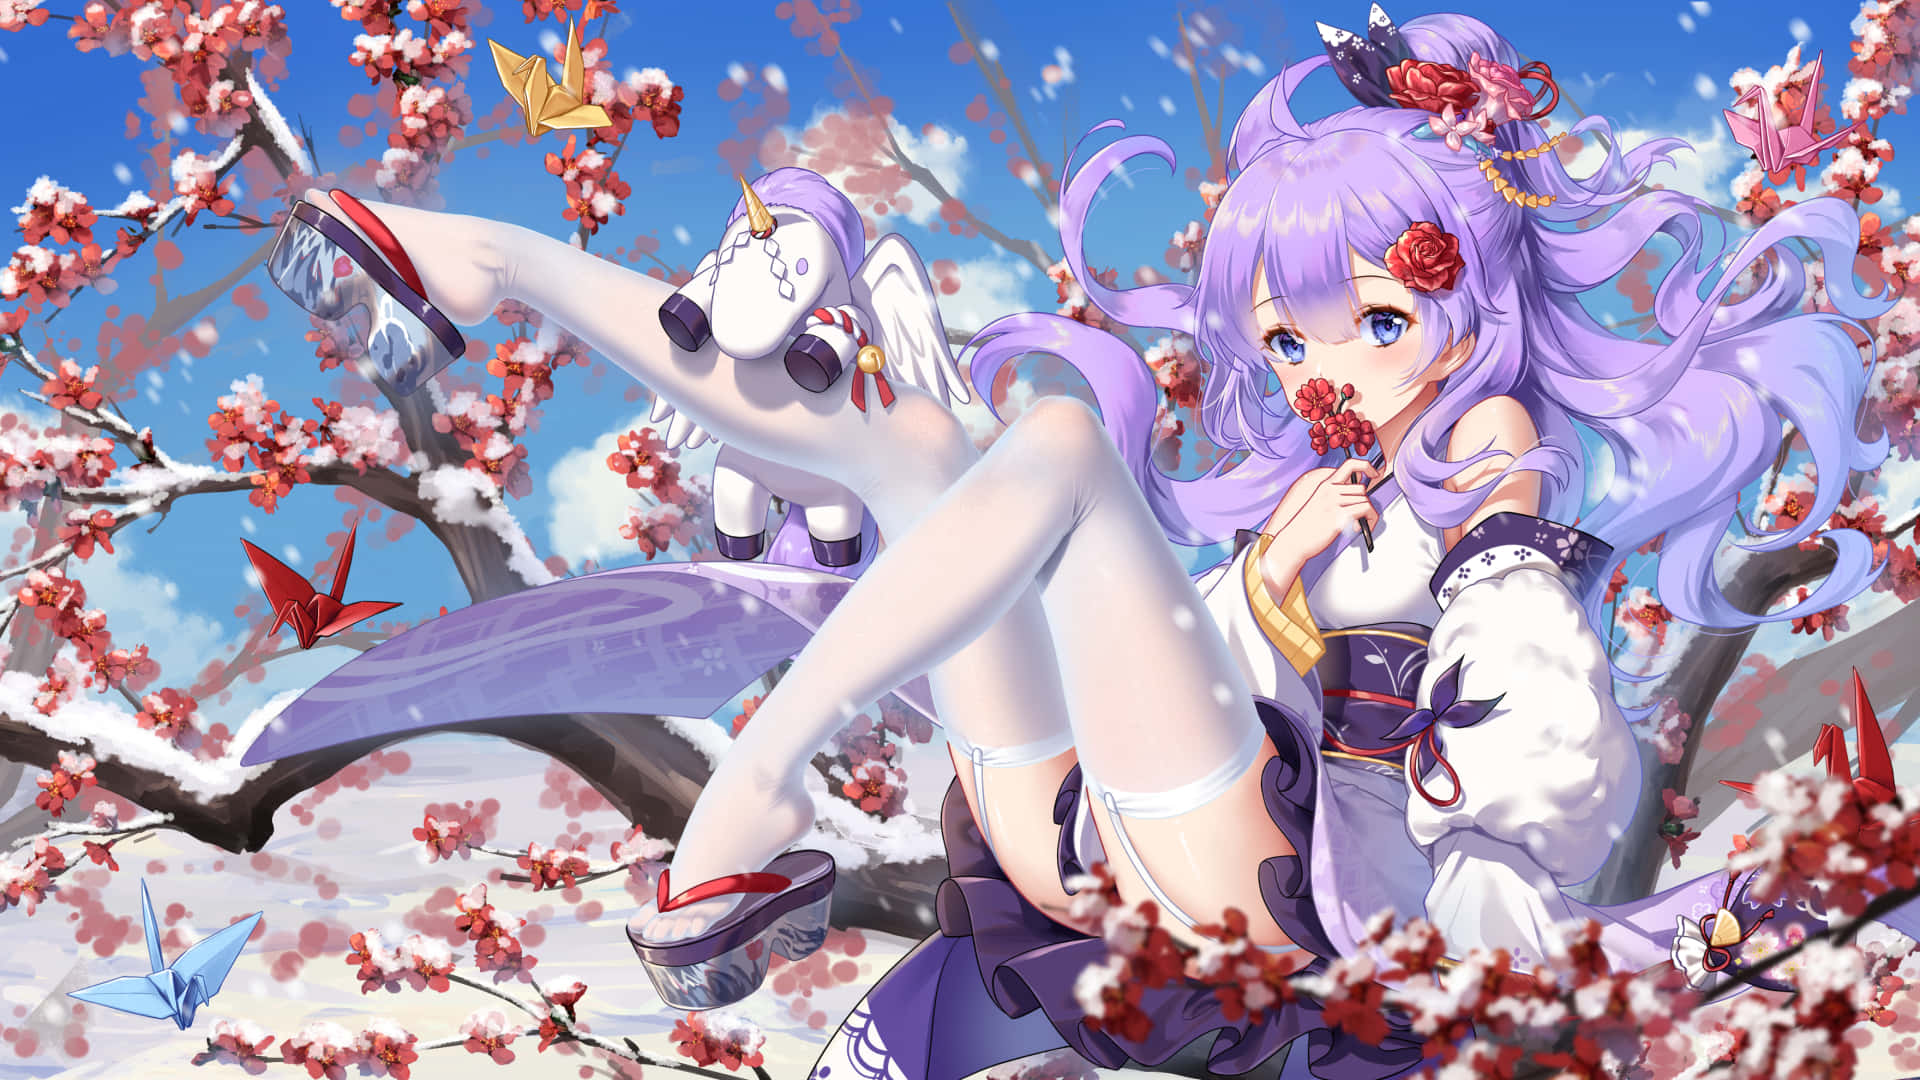 Cute Unicorn From Azur Lane Game In Action Wallpaper